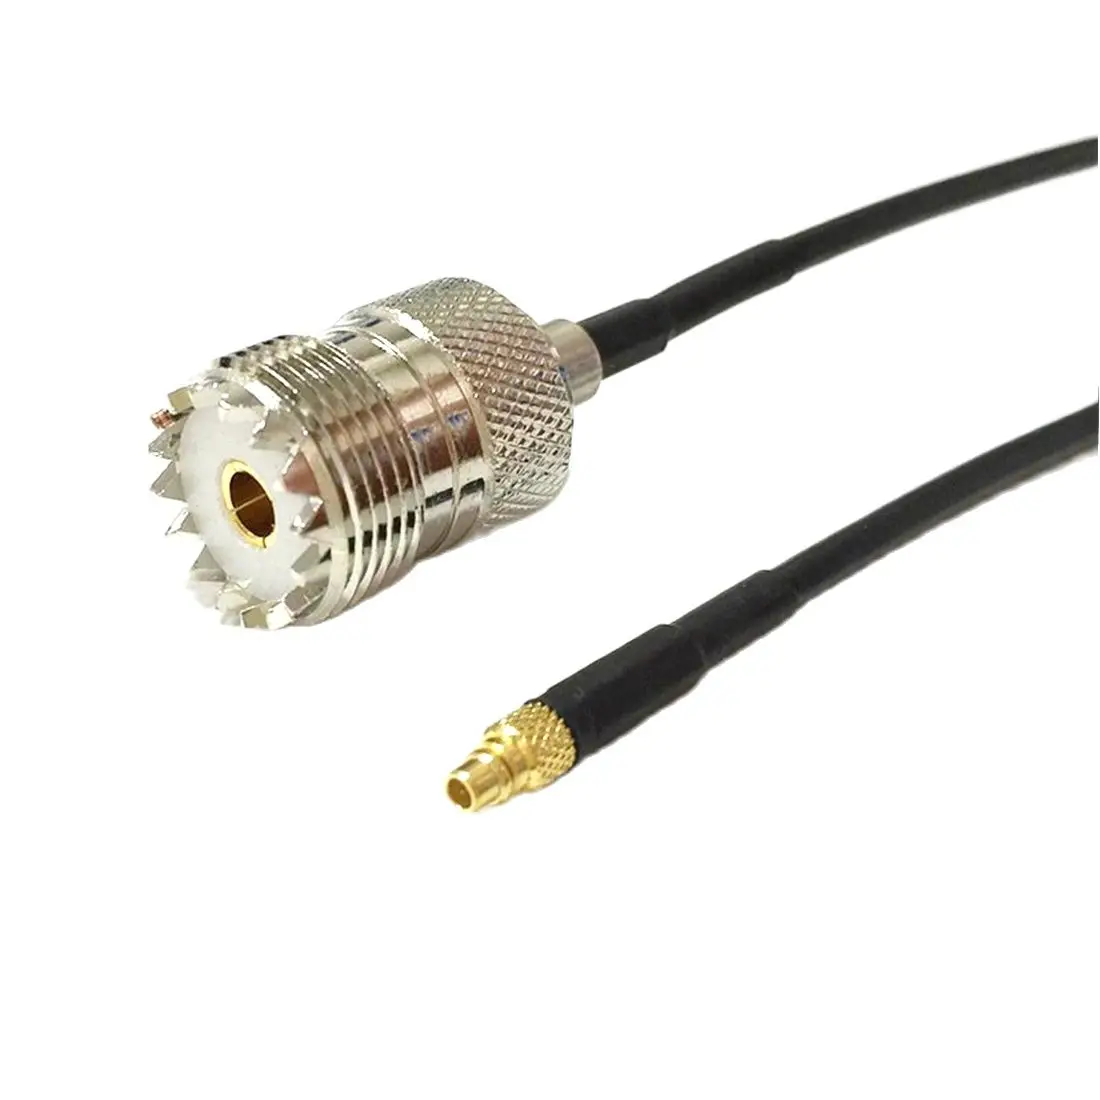 New Modem Coaxial Cable UHF Female Jack Connector Switch MMCX Male Plug Connector RG174 Cable 20CM 8inch Adapter 3 6 9m extension cables sma male to female coaxial extension cable wifi router antenna aerial copper plated gold cable